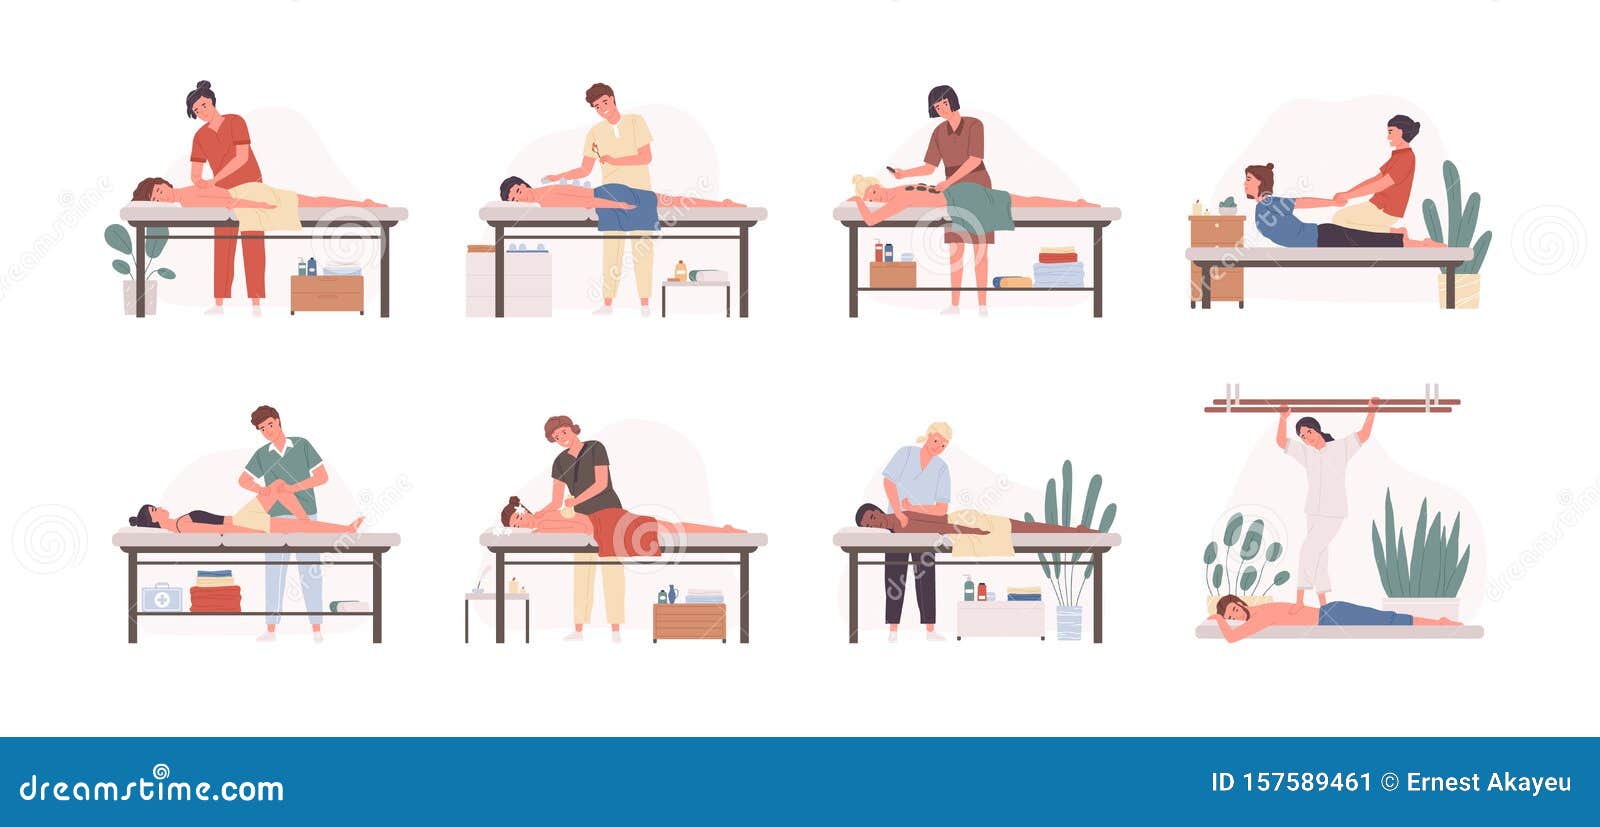 Massage Therapists At Work Flat Vector Illustrations Set Patients Lying On Couch Enjoying Body